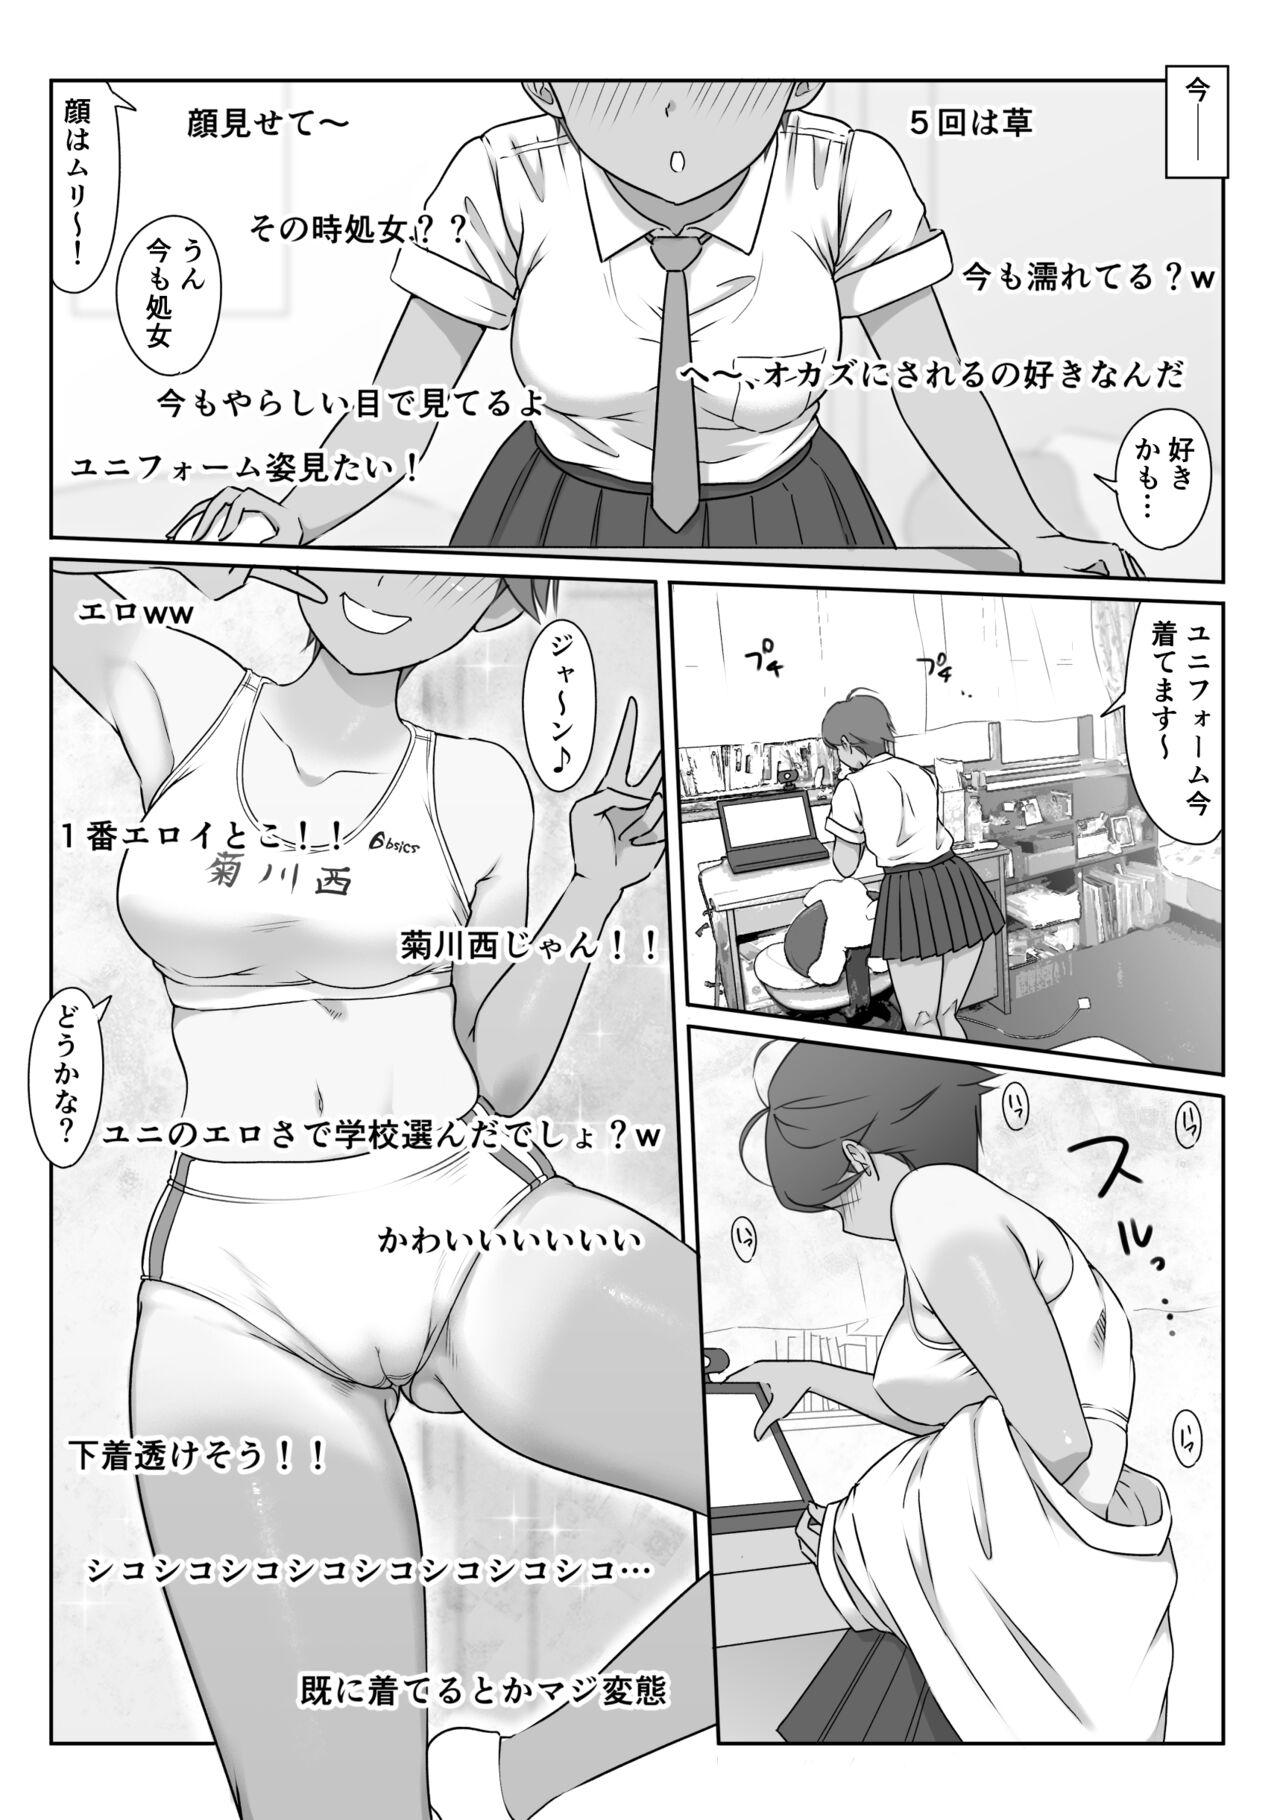 Missionary Porn ボーイッシュ陸上部明音の秘密配信 Best - Page 7